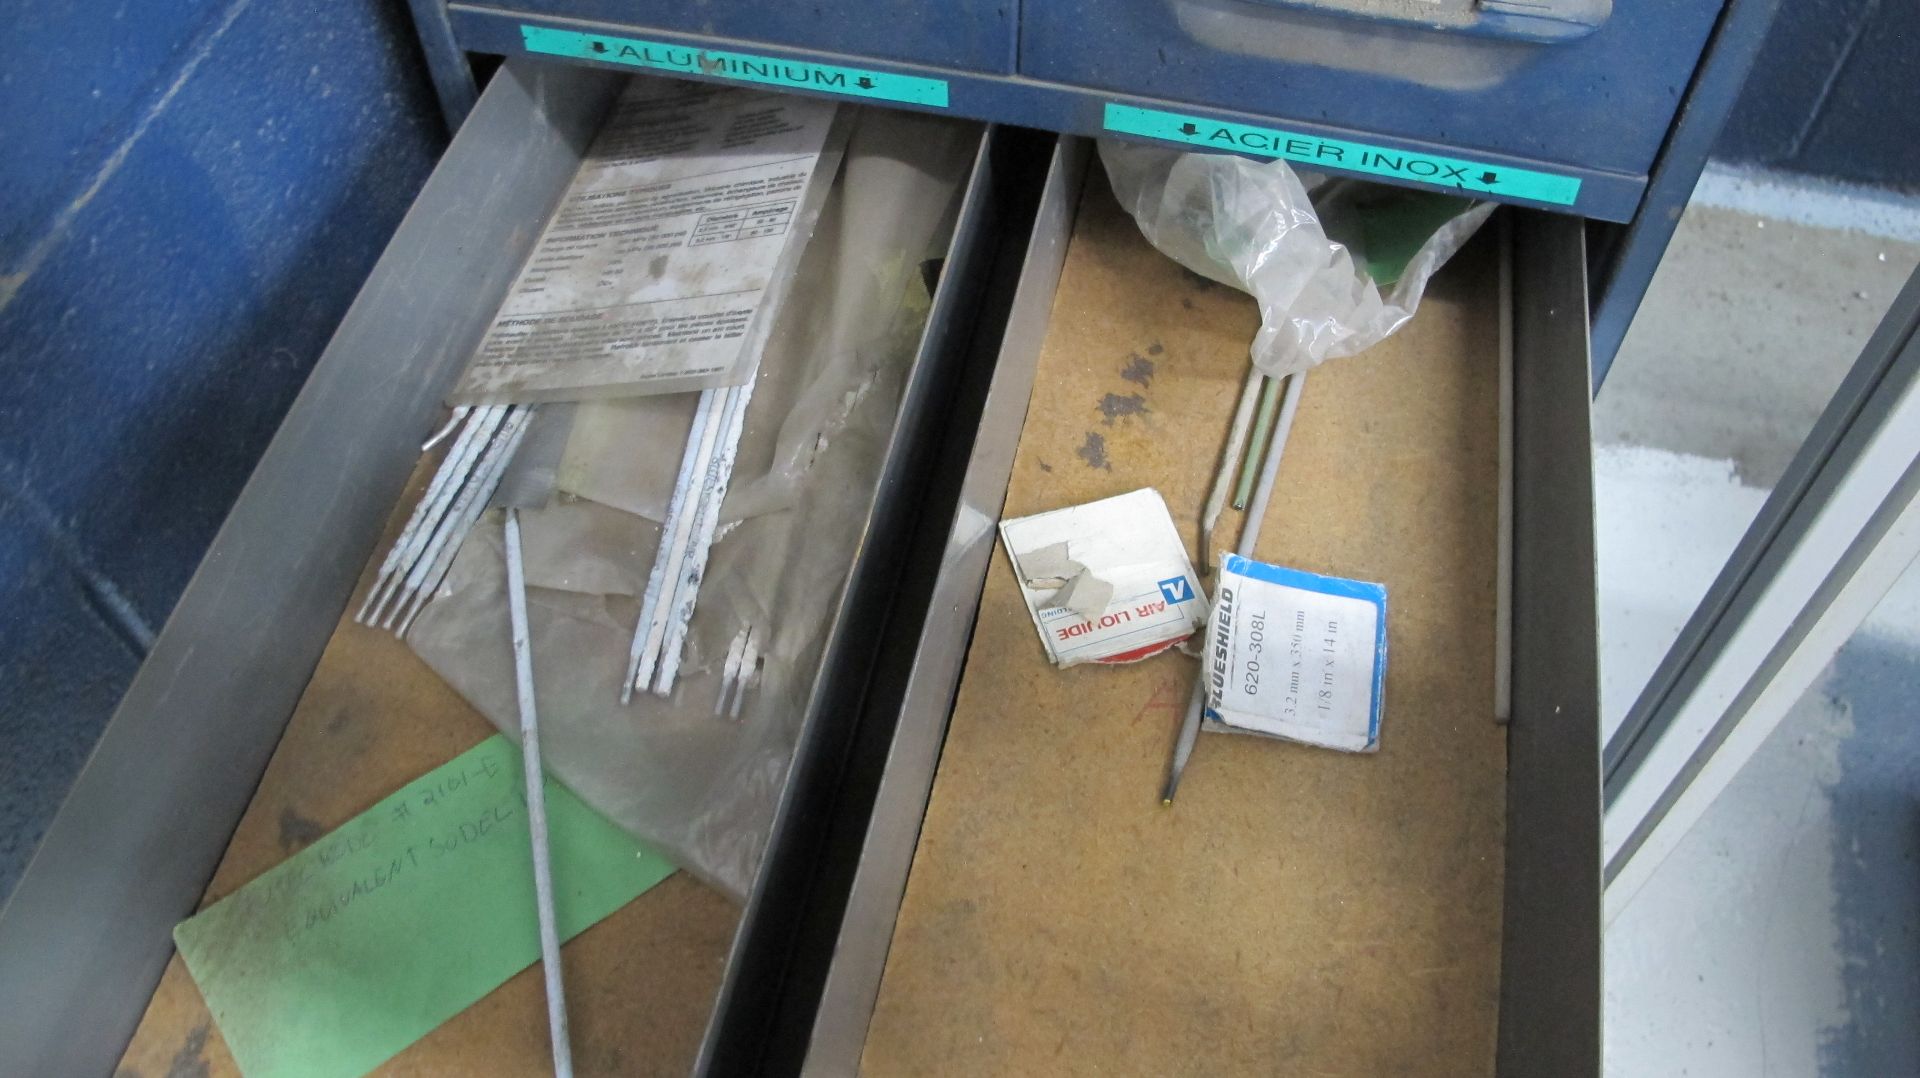 LOT OF WELDING ELECTRODES IN 10-LEVEL STORAGE CABINET AND WELDING SUPPLIES IN 2ND 10-LEVEL STORAGE - Image 7 of 14